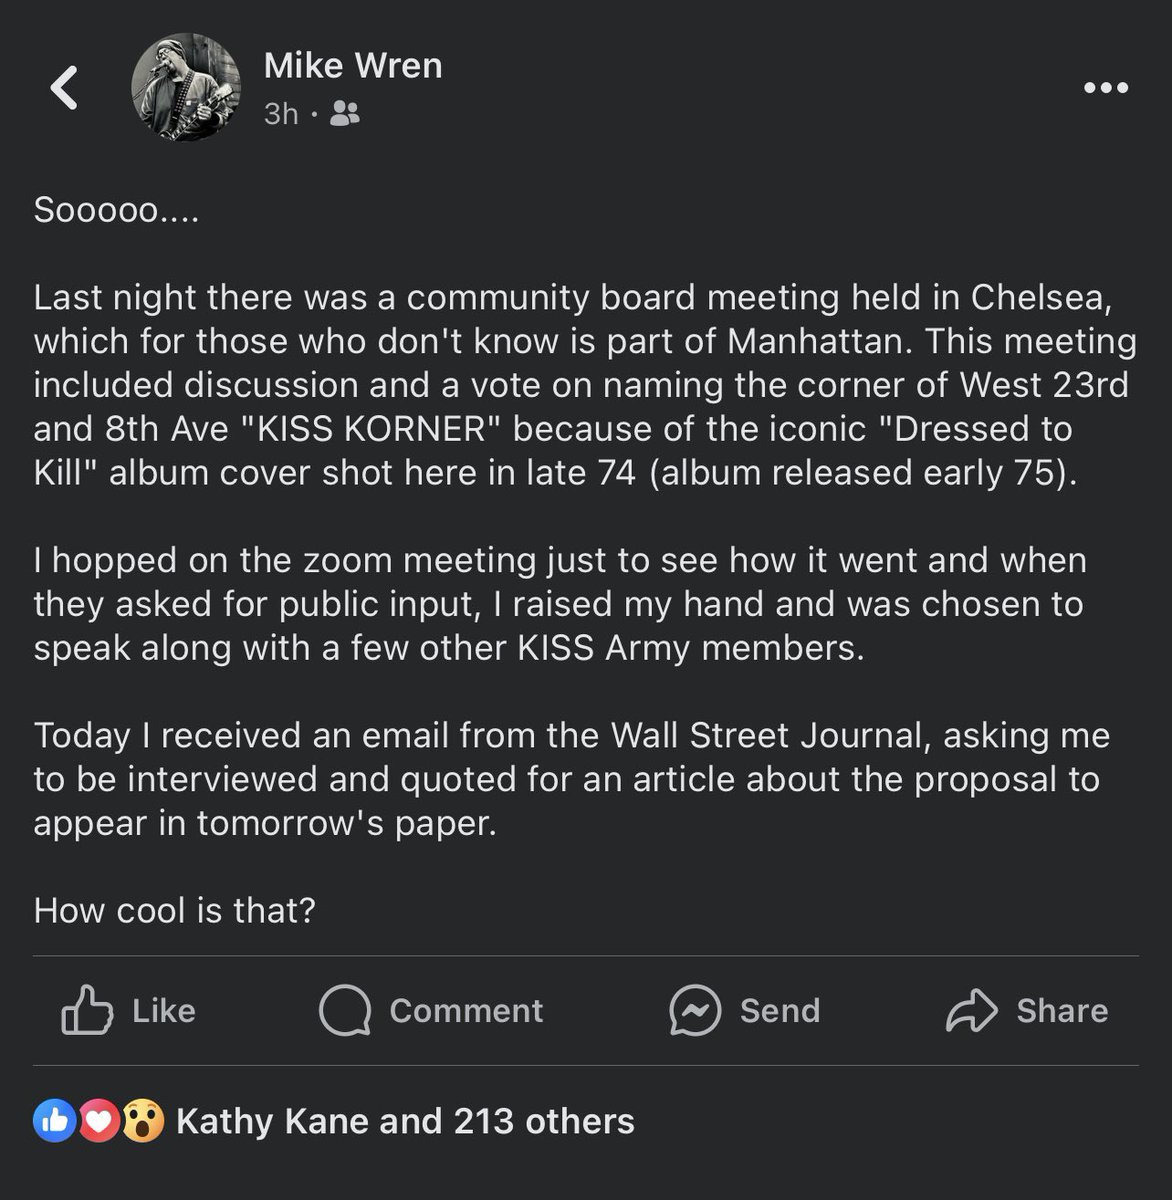 Posted this on my Facebook page but makes sense to share here...

But check this out about #KISSKORNER and The Wall Street Journal contacting me to discuss 23rd and 8th Ave in NYC. 

#KISS #NYC #HometownBoys